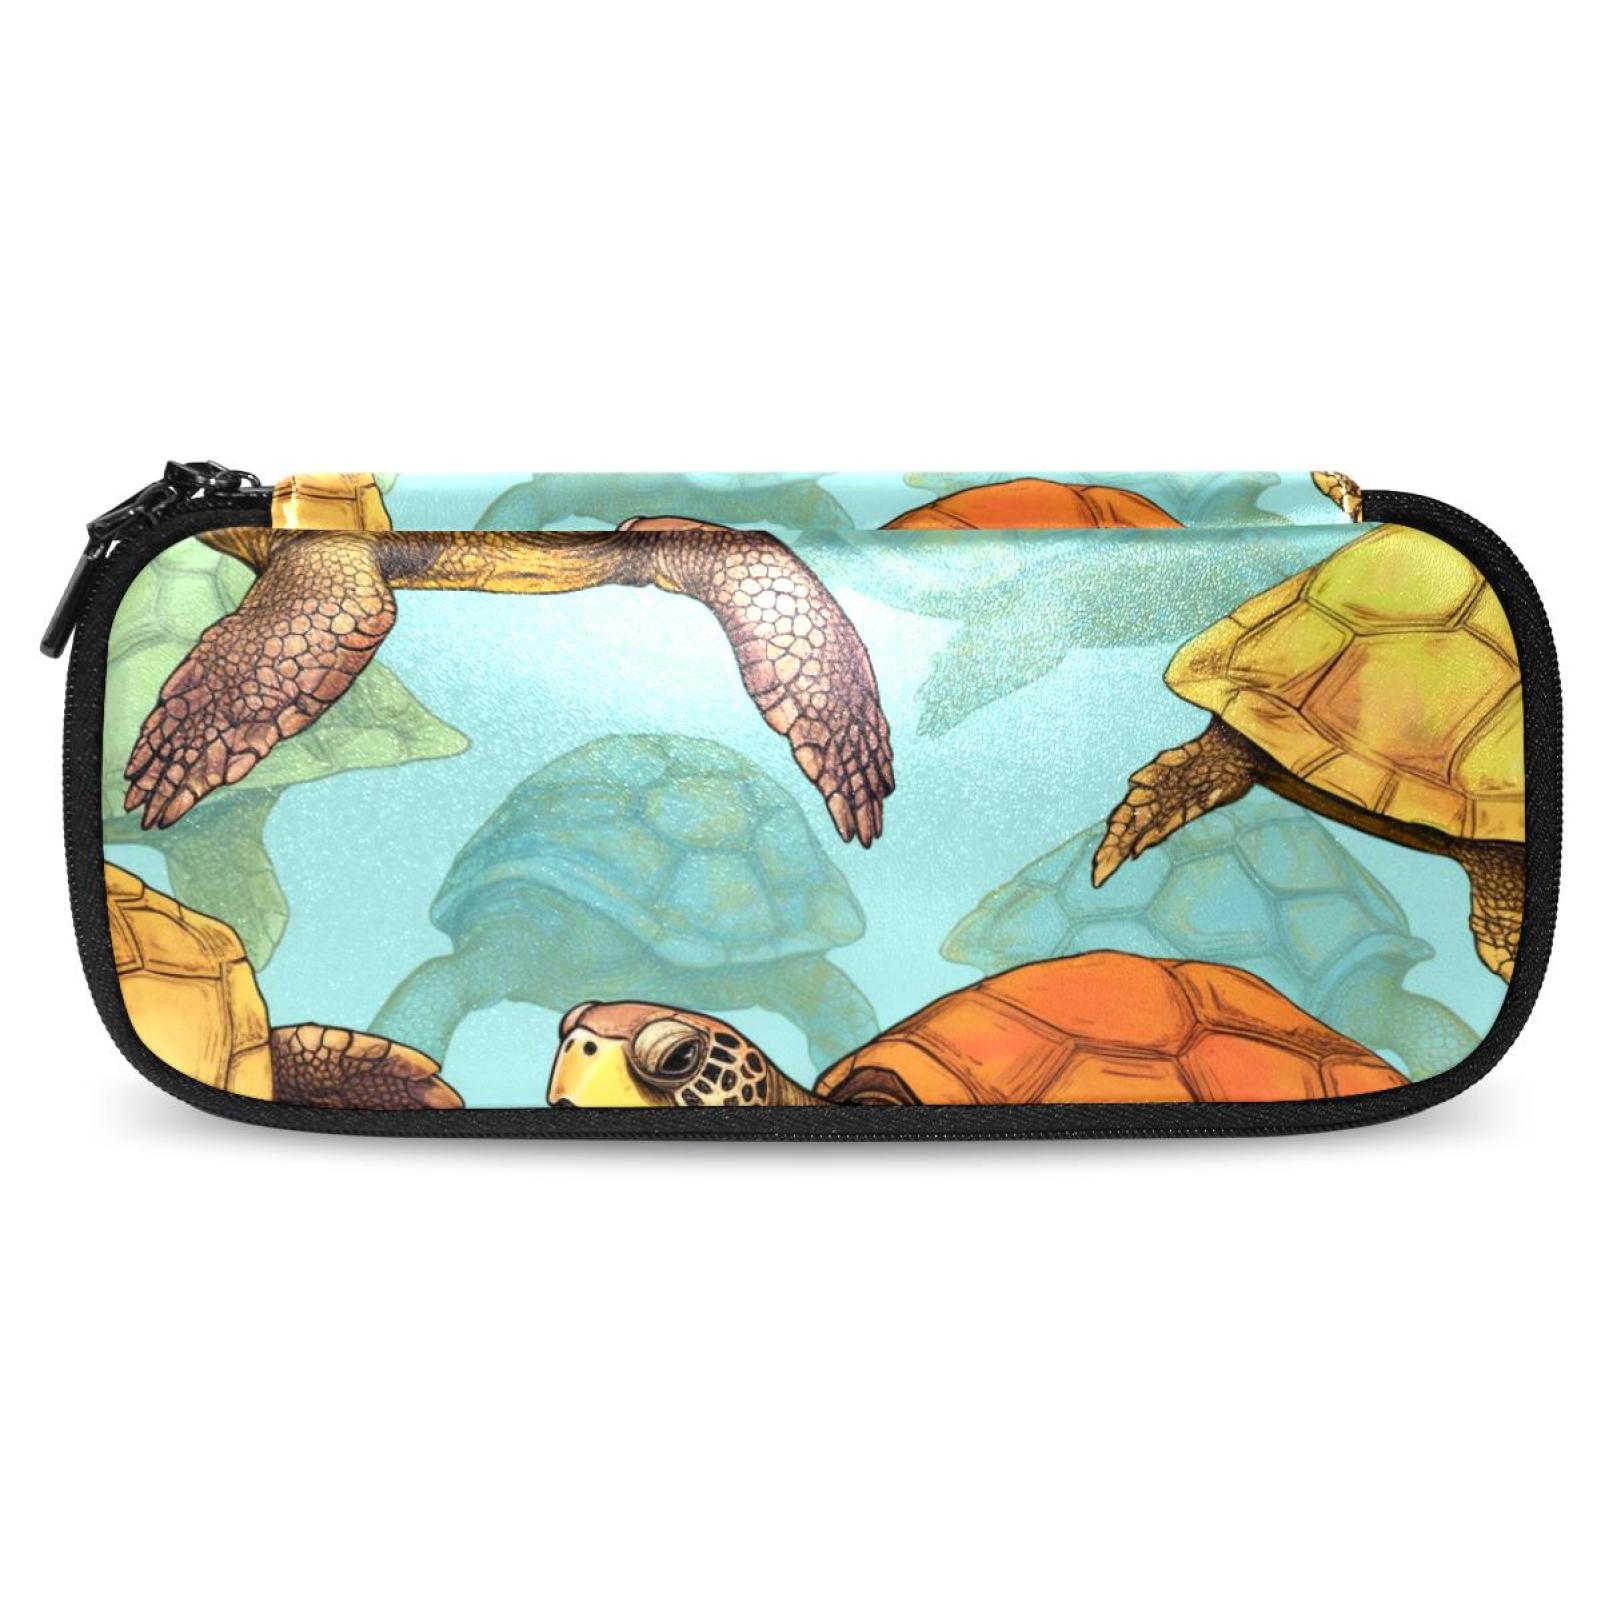 Sea Turtle Pattern Stylish Leather Toiletry Bag - Durable Travel ...